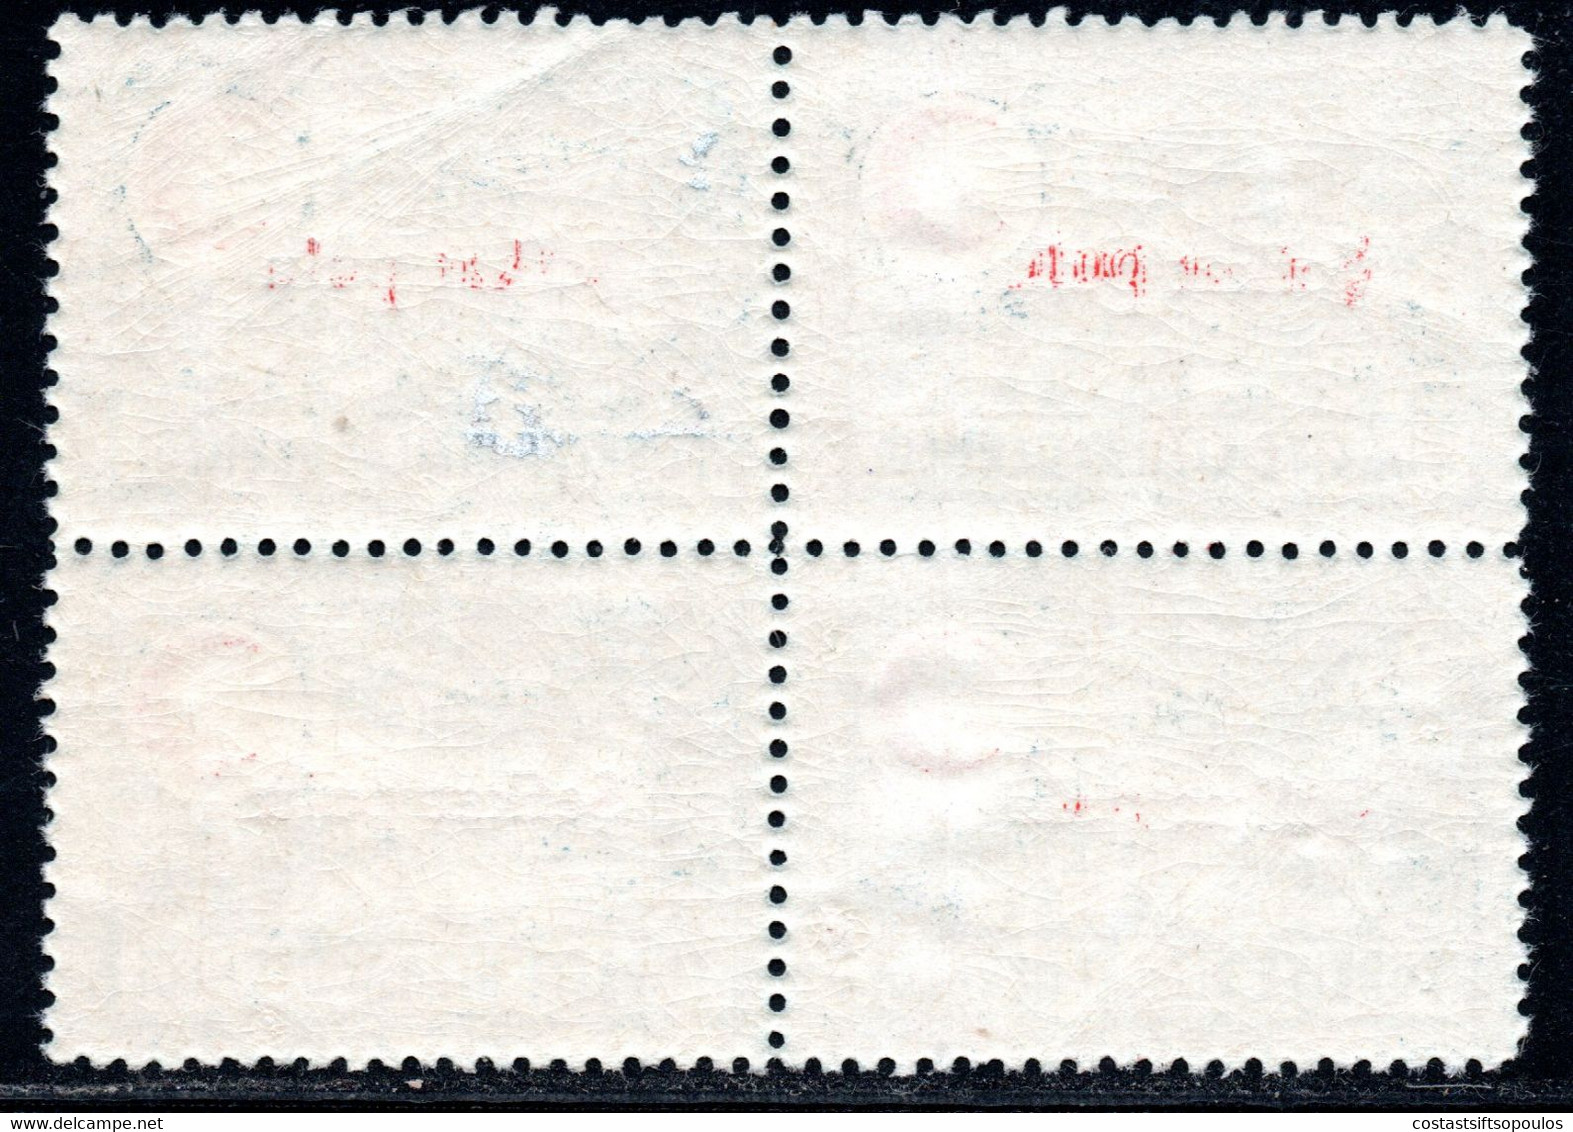 1016.TURKEY,1949 2 1/2 L.SEFKAT PULU CHARITY RED CRESCENT,Y.T.164 MNH BLOCK OF 4 - Unused Stamps